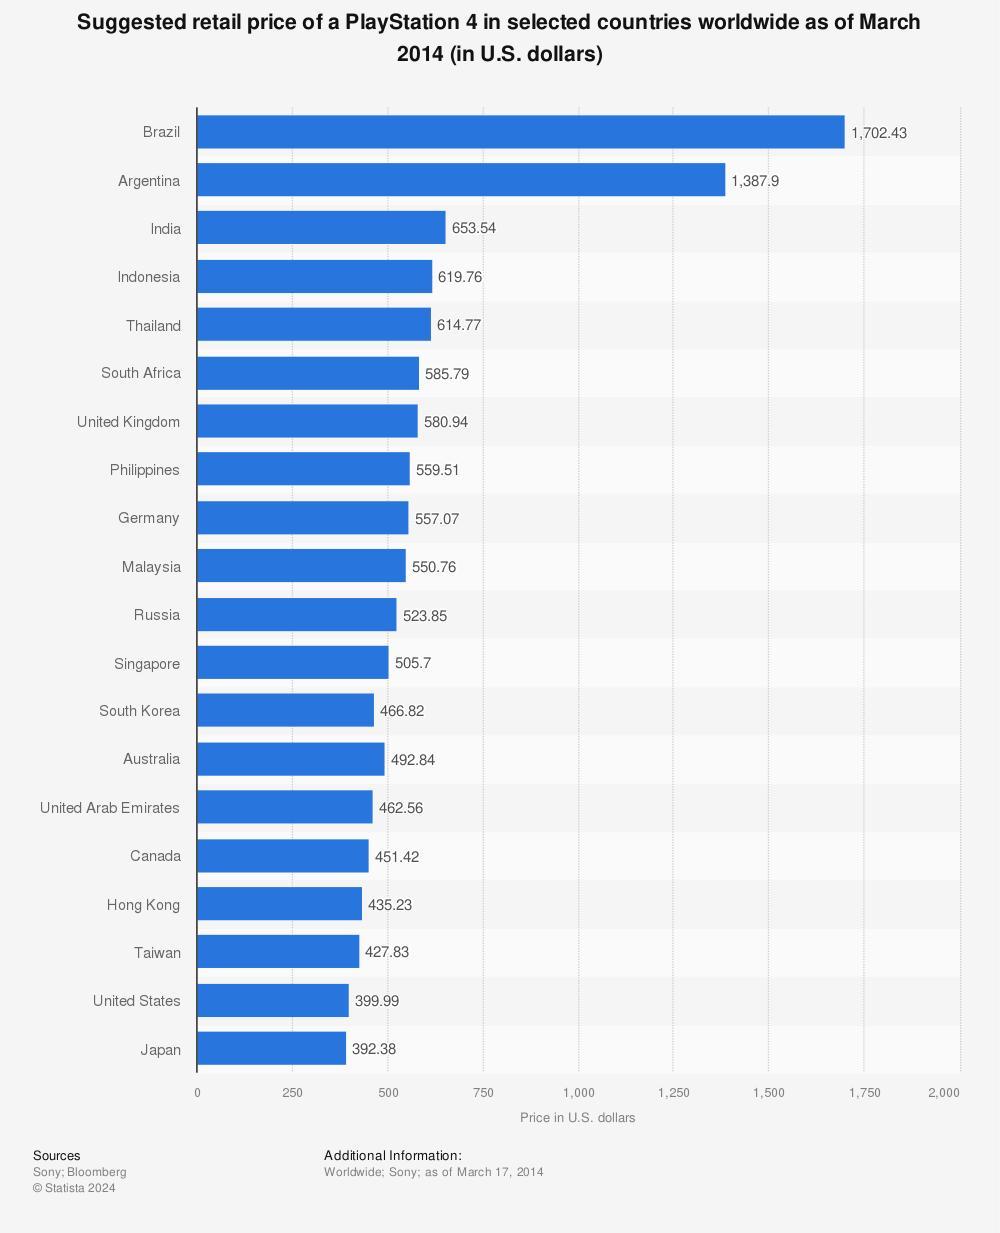 Statistic: Suggested retail price of a PlayStation 4 in selected countries worldwide as of March 2014 (in U.S. dollars) | Statista